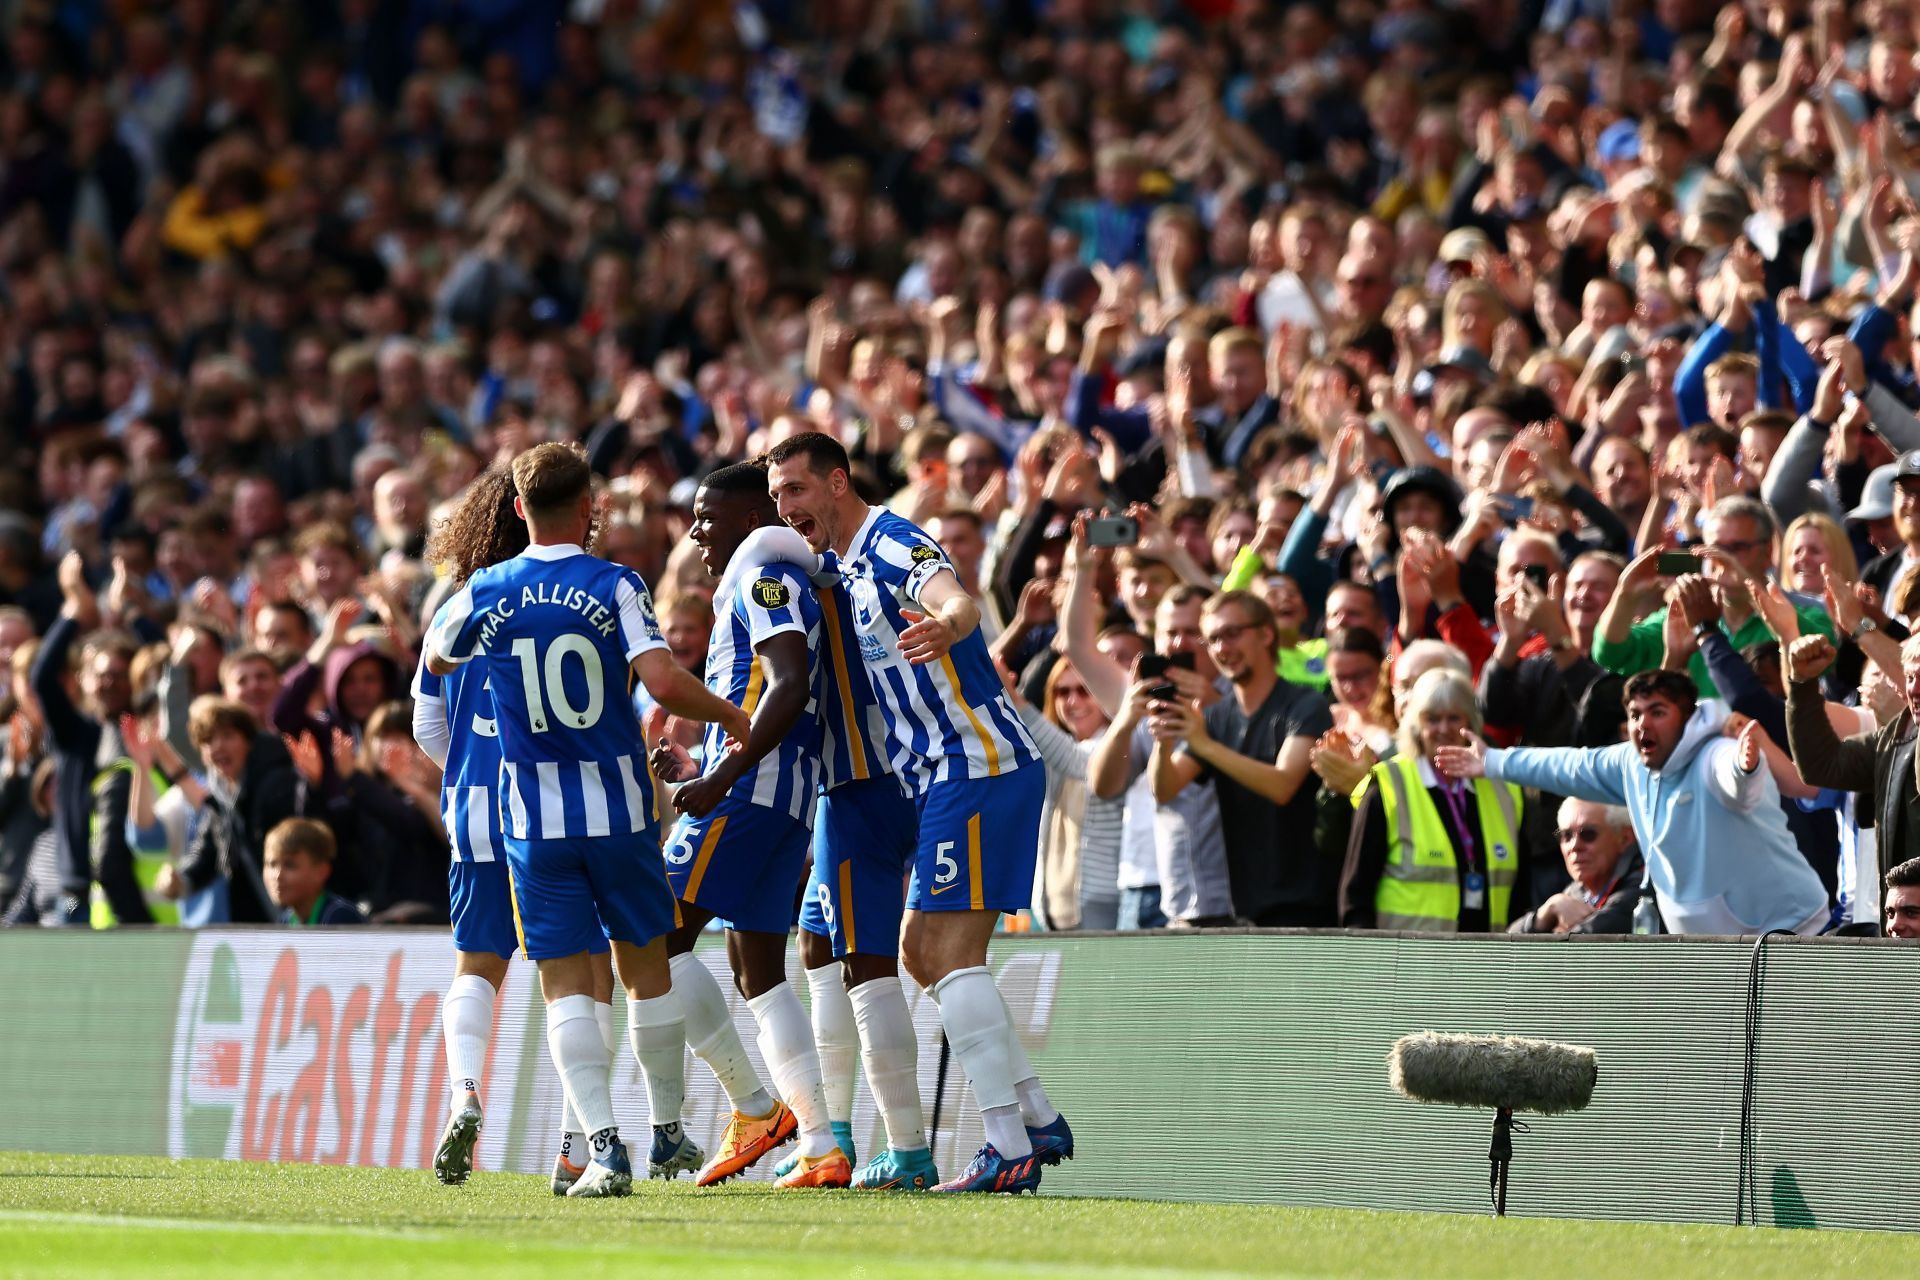 Brighton &amp; Hove Albion outplayed the Red Devils.